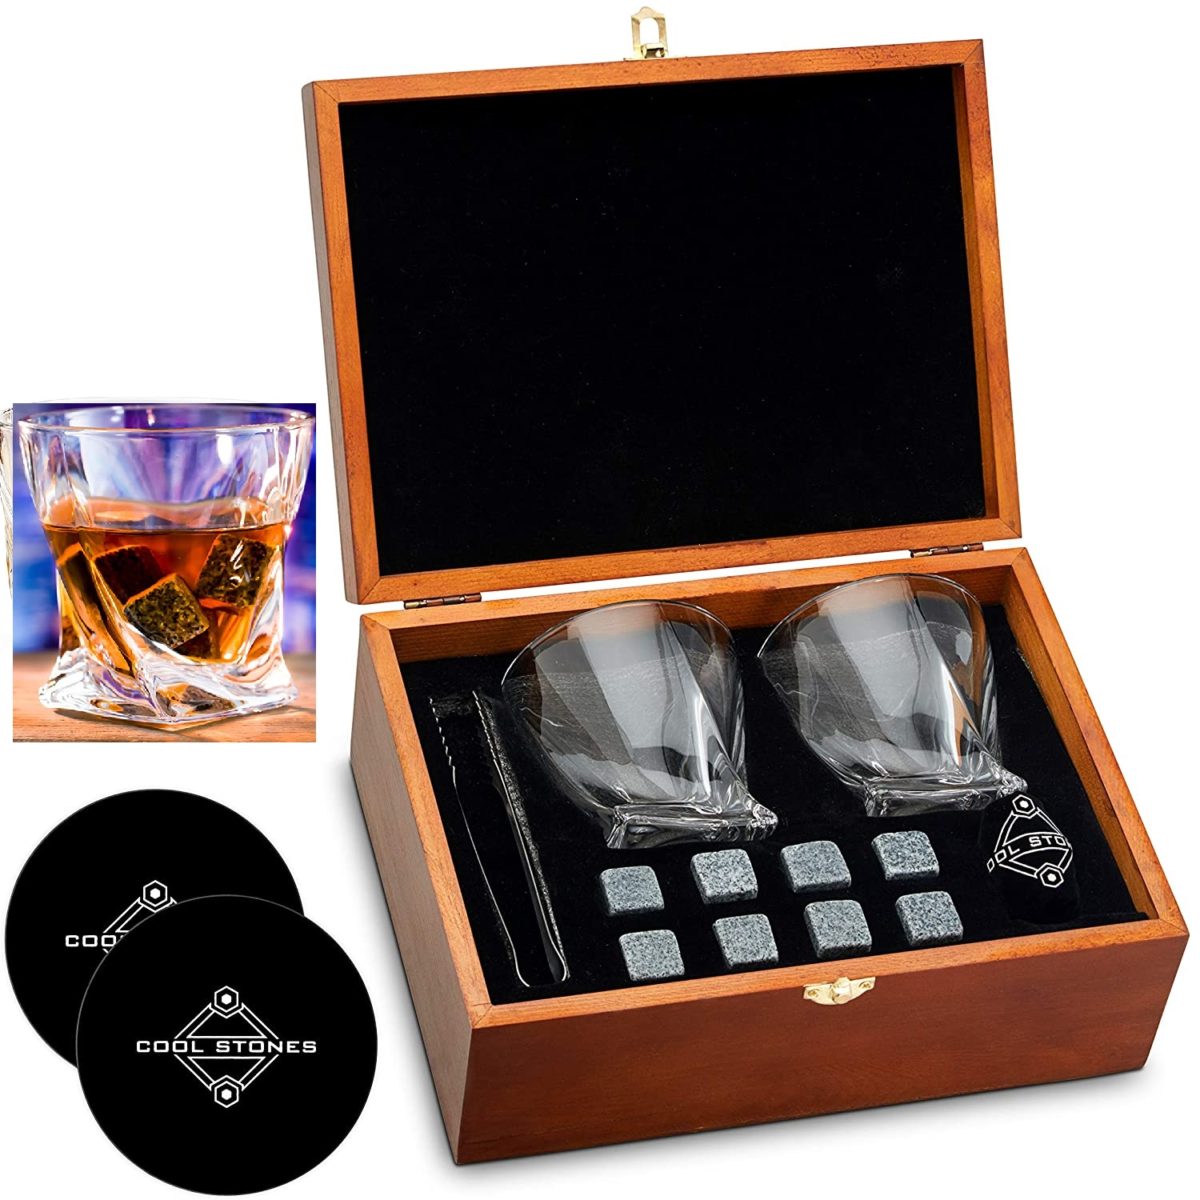 100 Best Alcohol gifts - Gifts For Drinkers / Gift Ideas For Drink Lovers